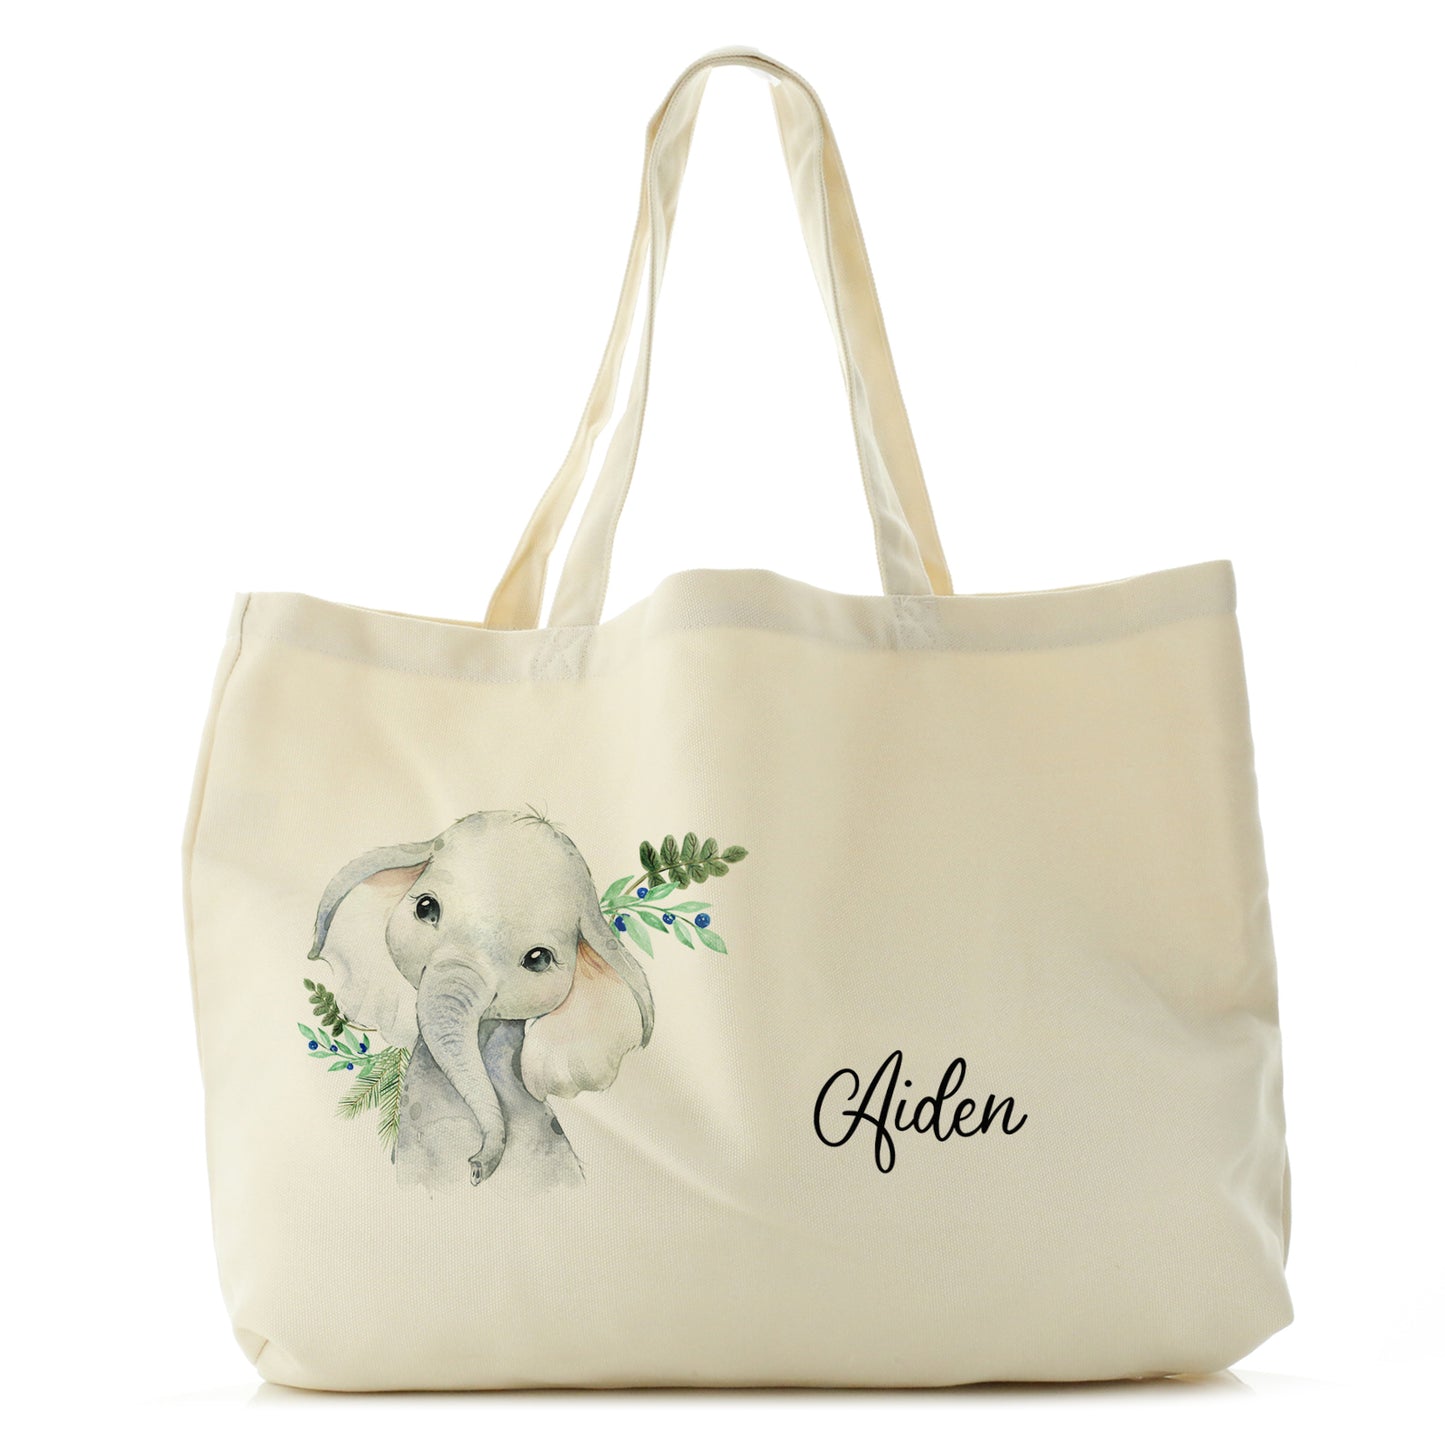 Personalised Canvas Tote Bag with Elephant Blue Berries and Cute Text